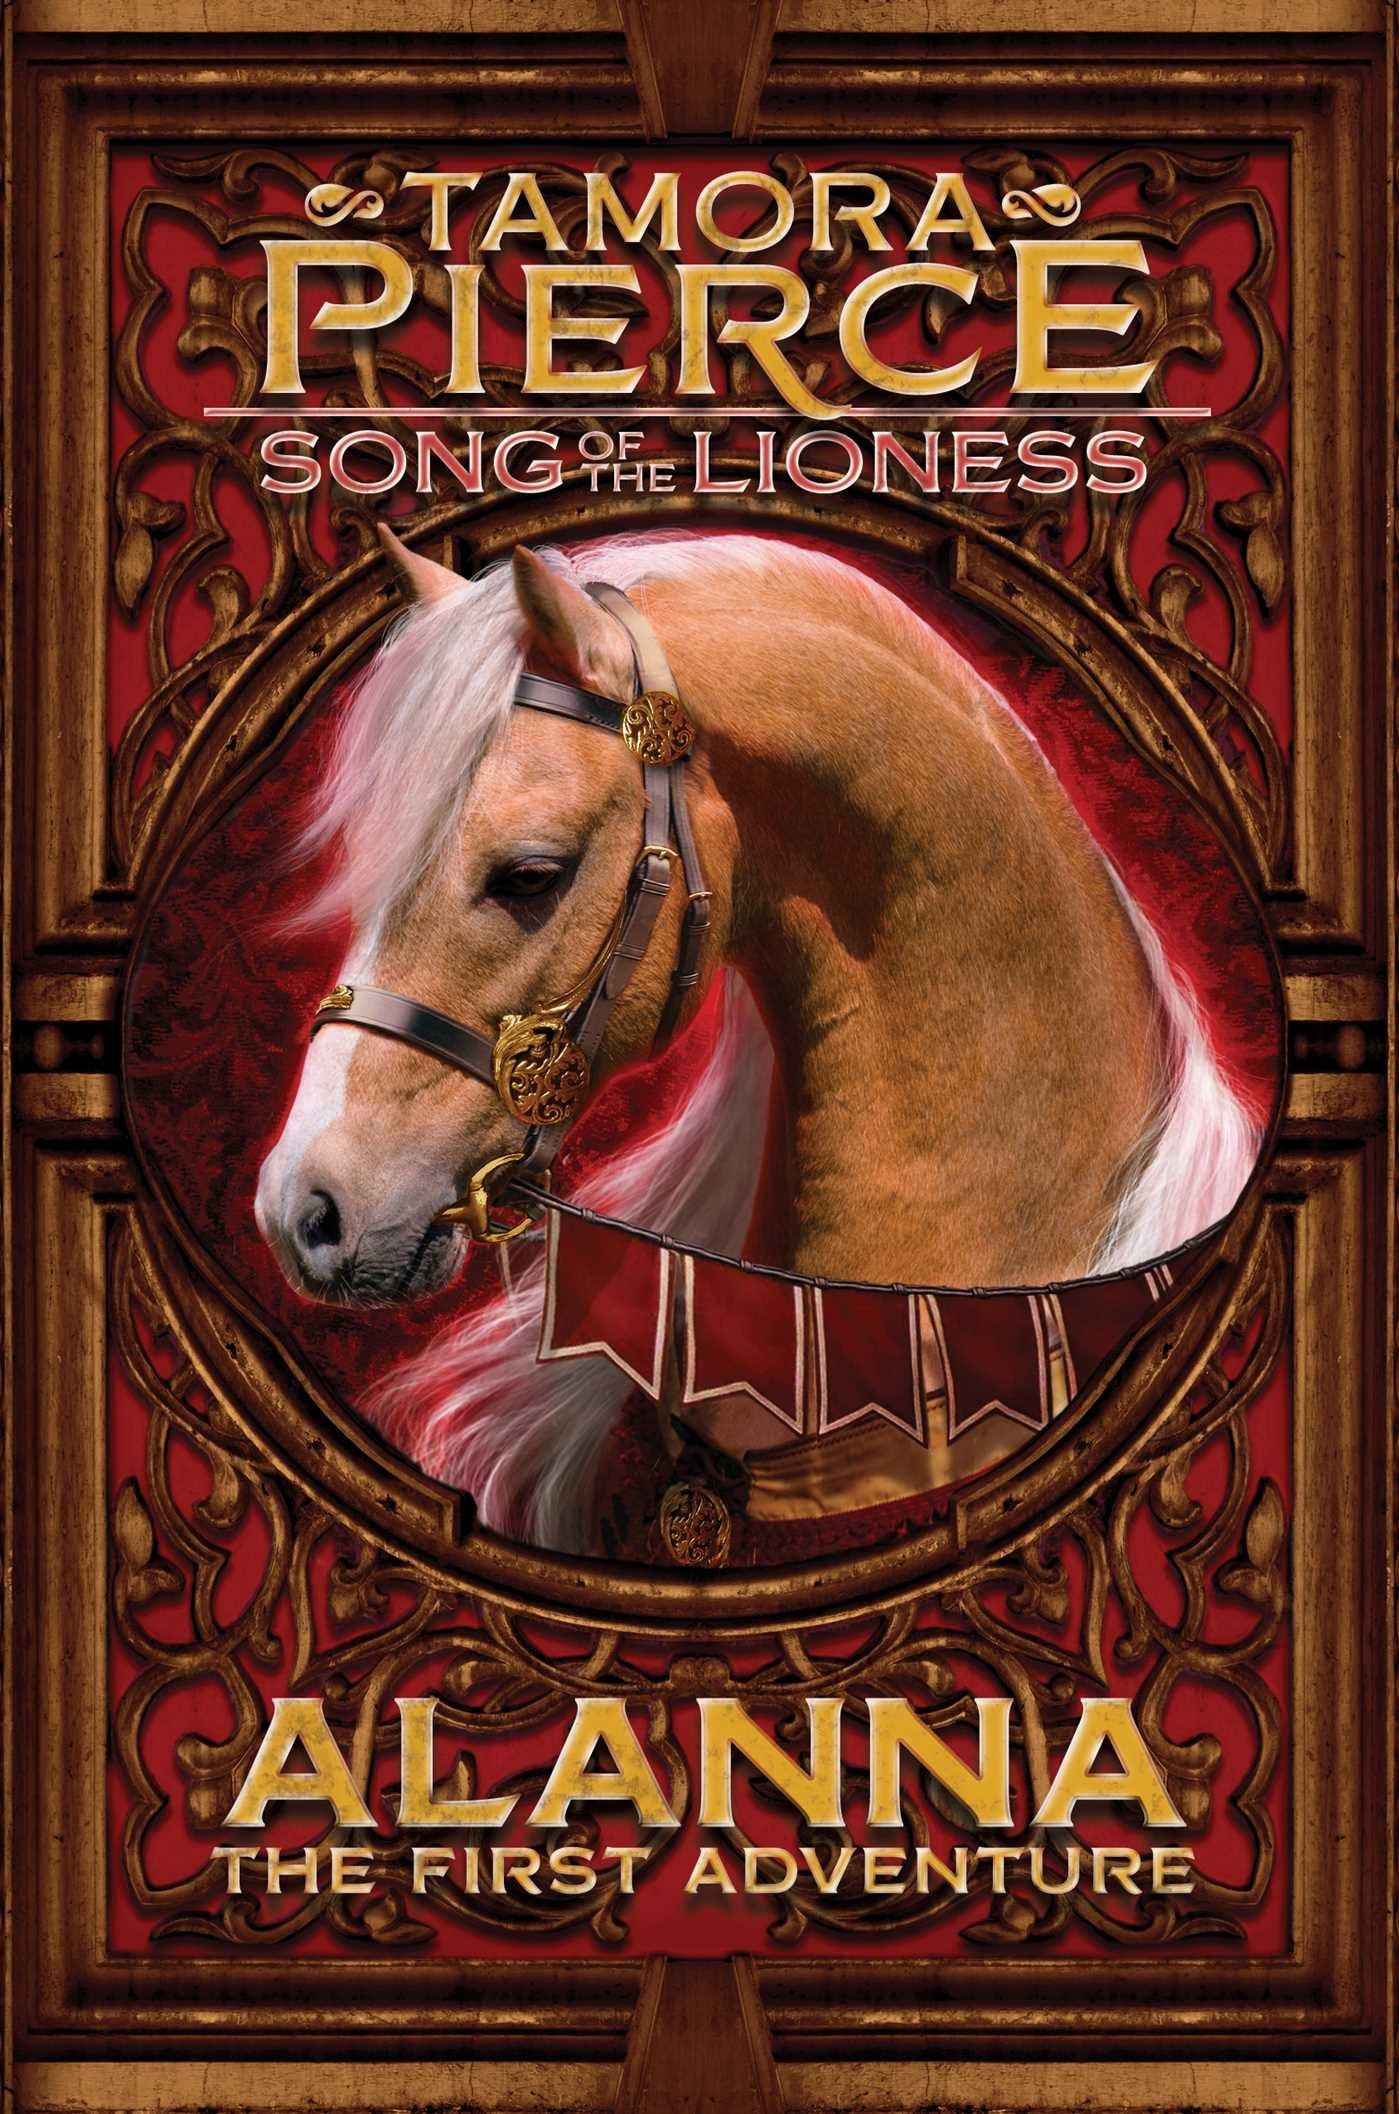 A book from The Song of the Lioness series by Tamora Pierce.